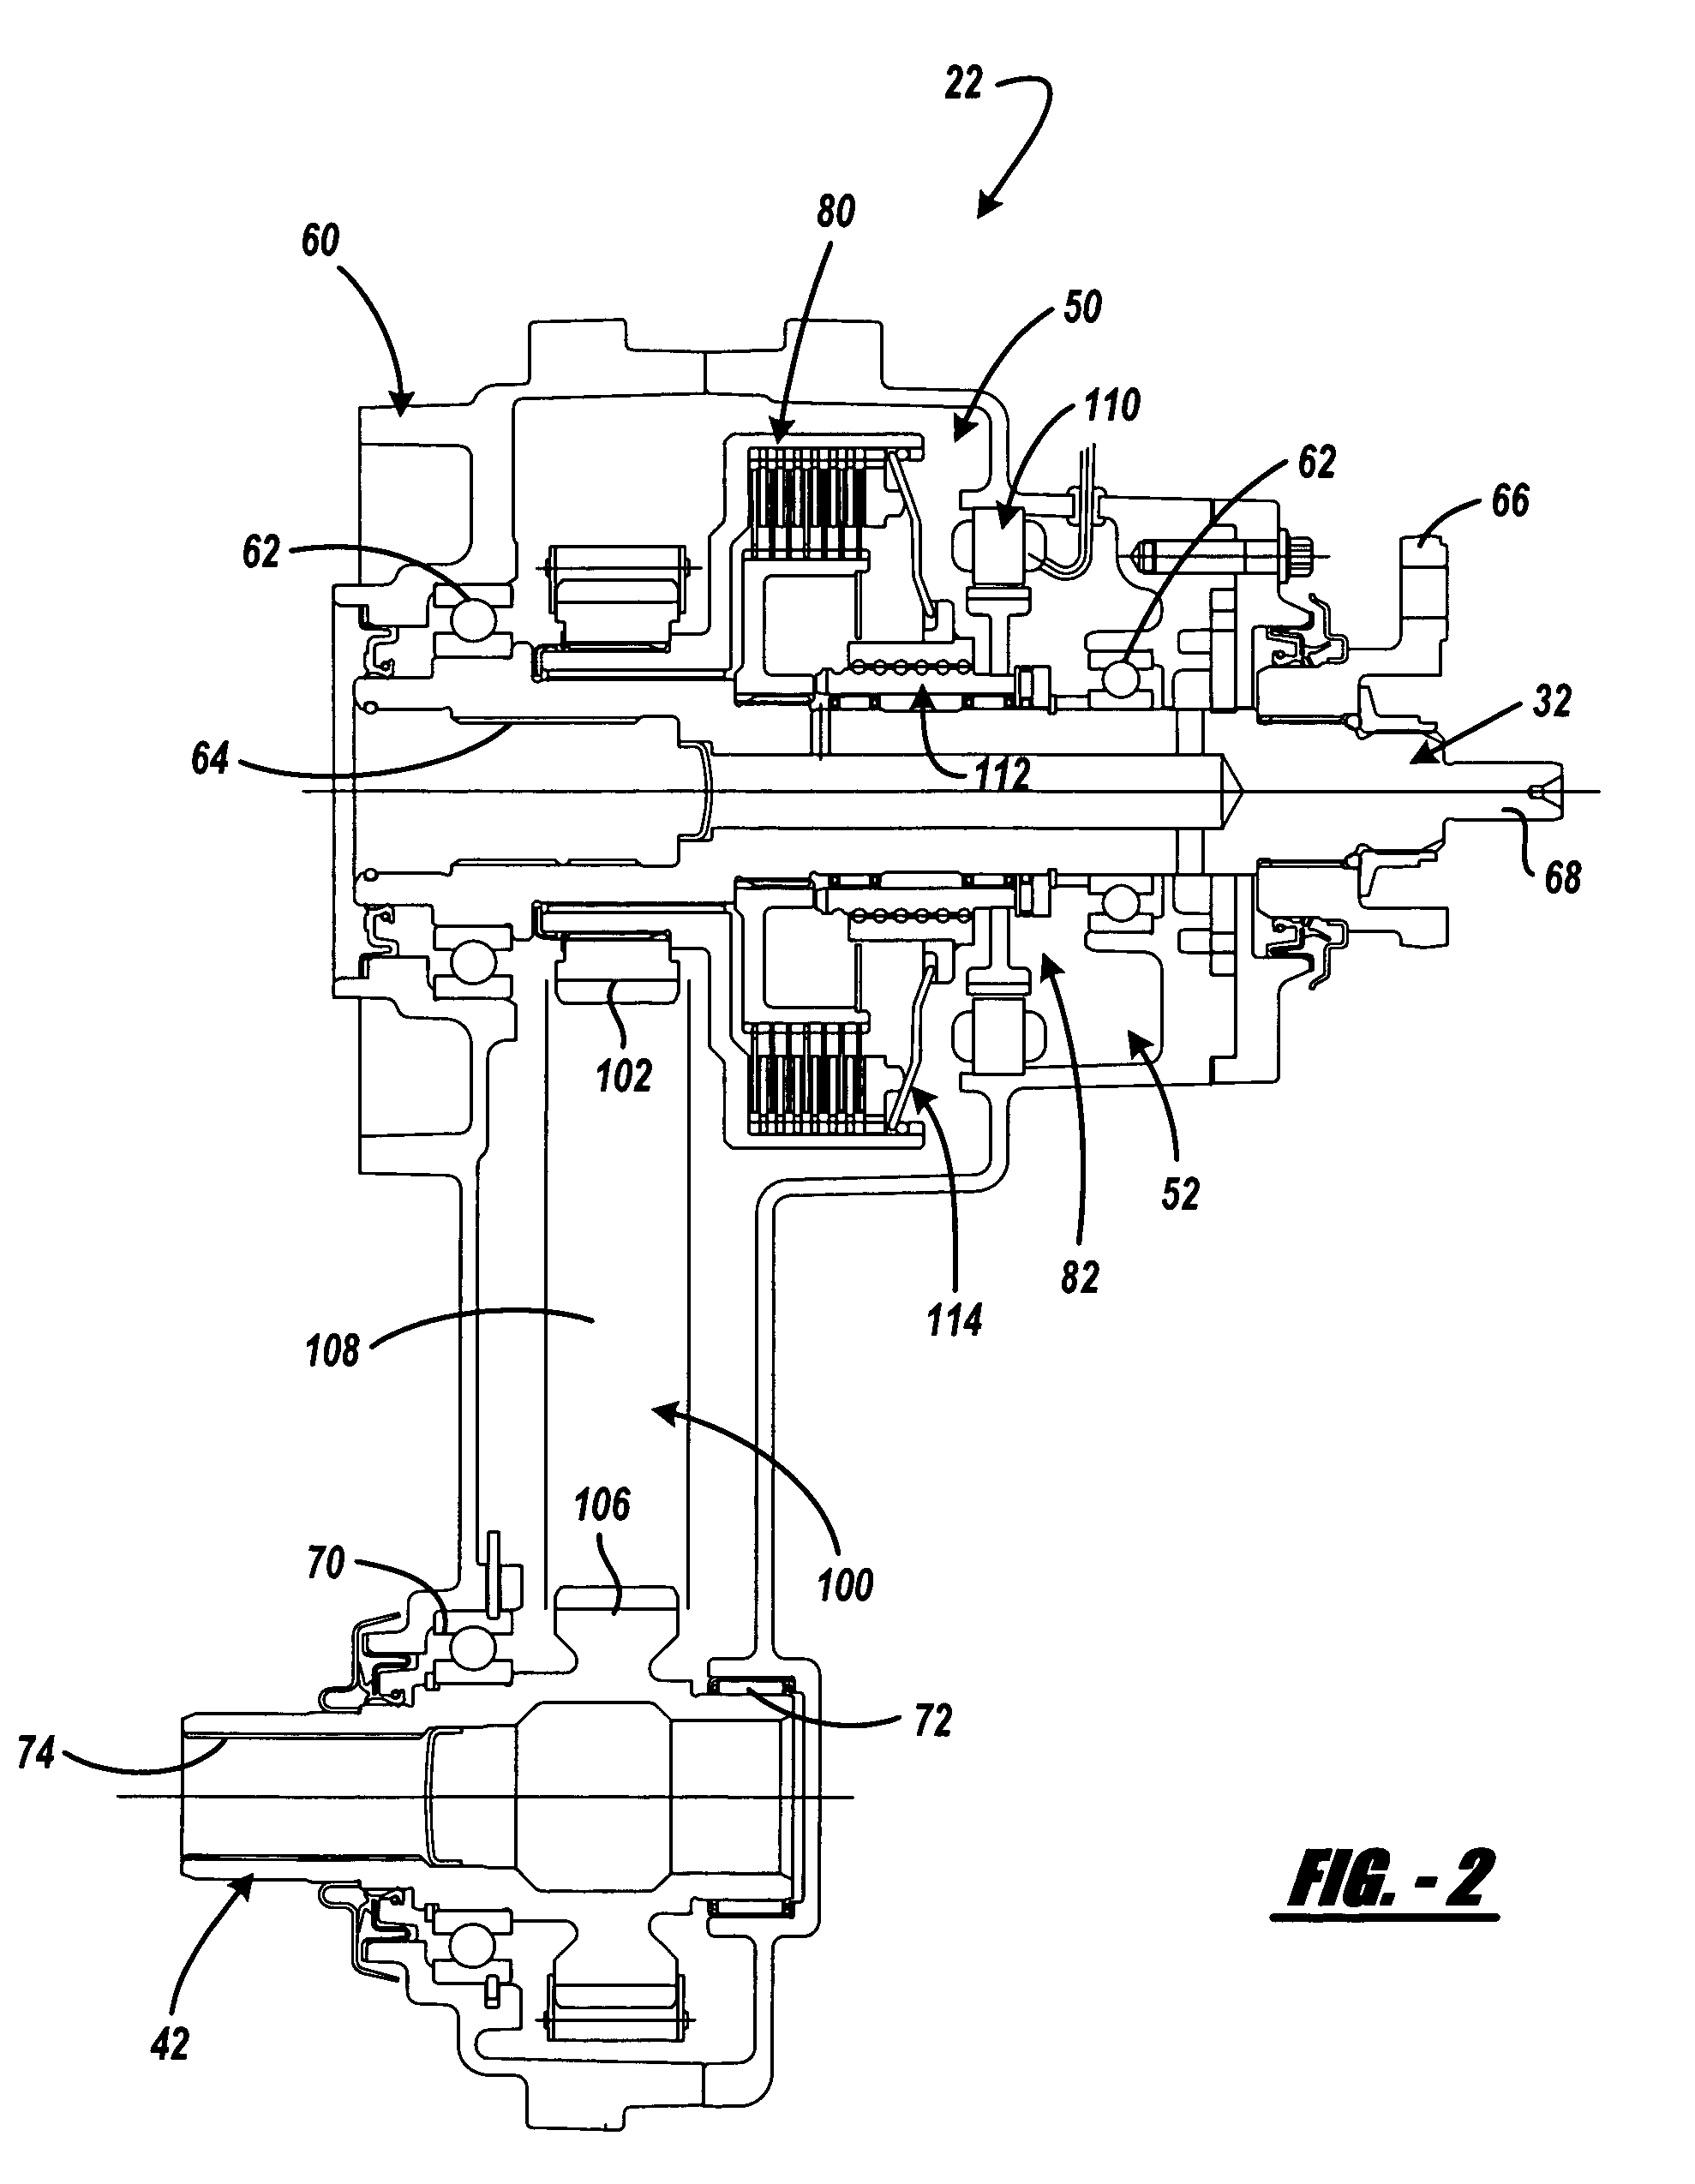 Torque vectoring device having an electric motor/brake actuator and friction clutch